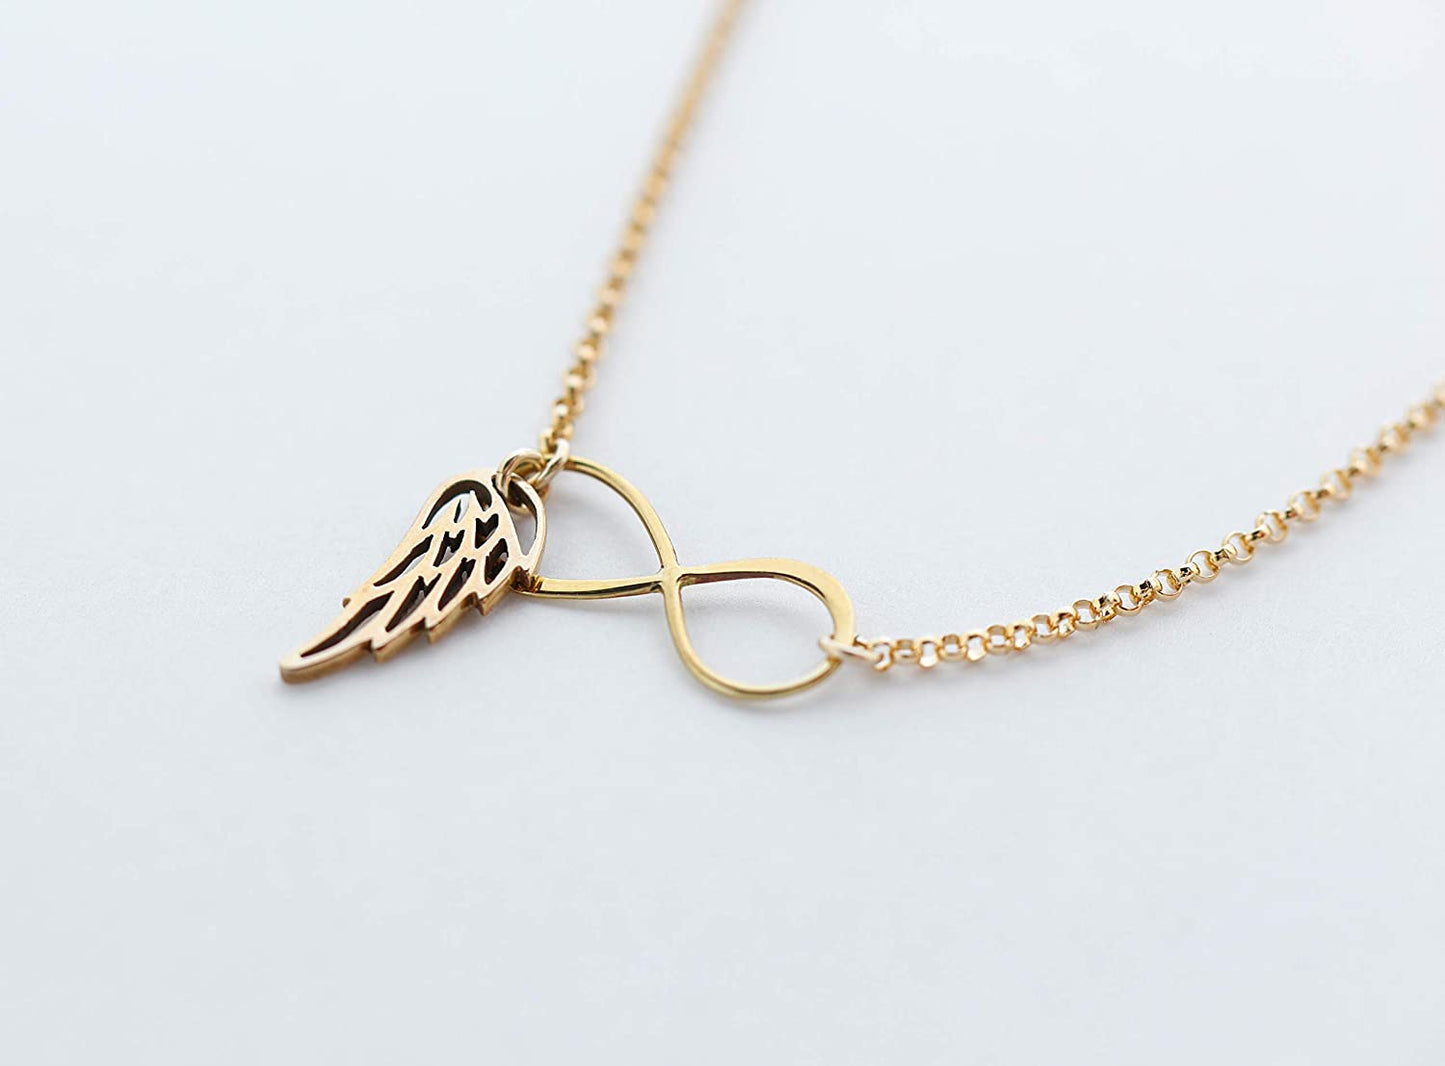 Memorial Gift Jewelry • Sorry For Your Loss Necklace • 14k Gold FIlled • Angel Wing Infinity • In Memory of Husband Mother Father Sister Child Baby Pet Dog Miscarriage • Sympathy Remembrance Gift